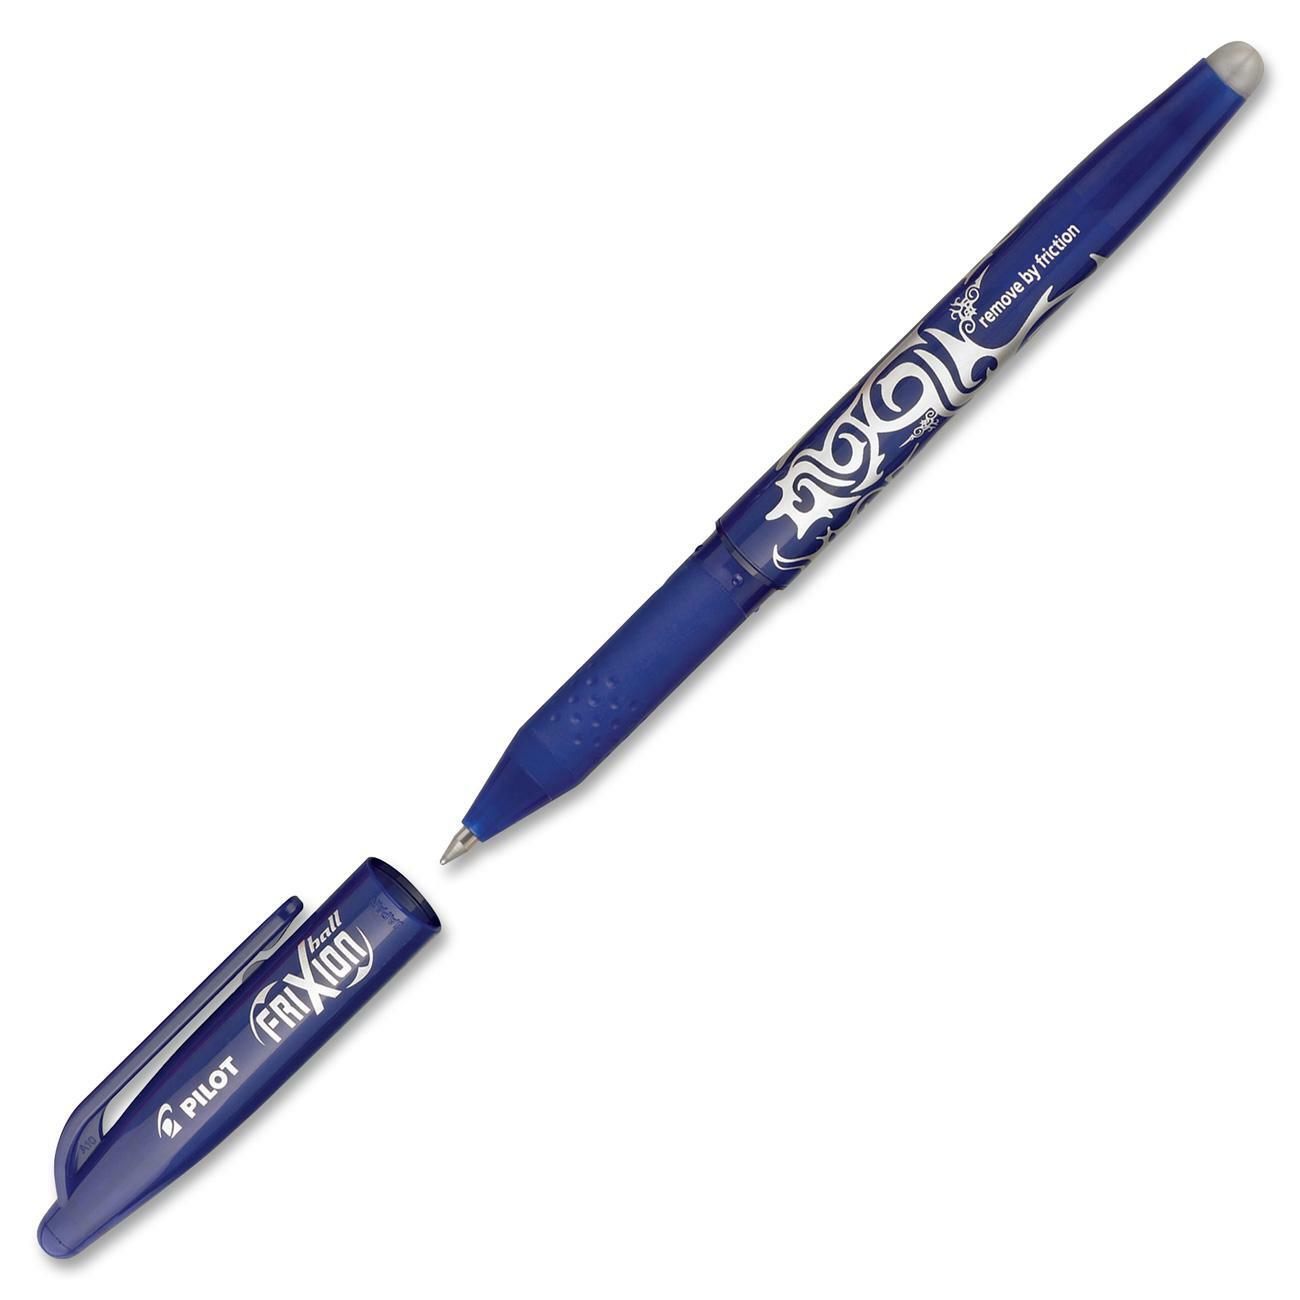 FriXion Ball 0.7 - Gel Ink Rollerball pen - Medium Tip - FriXion